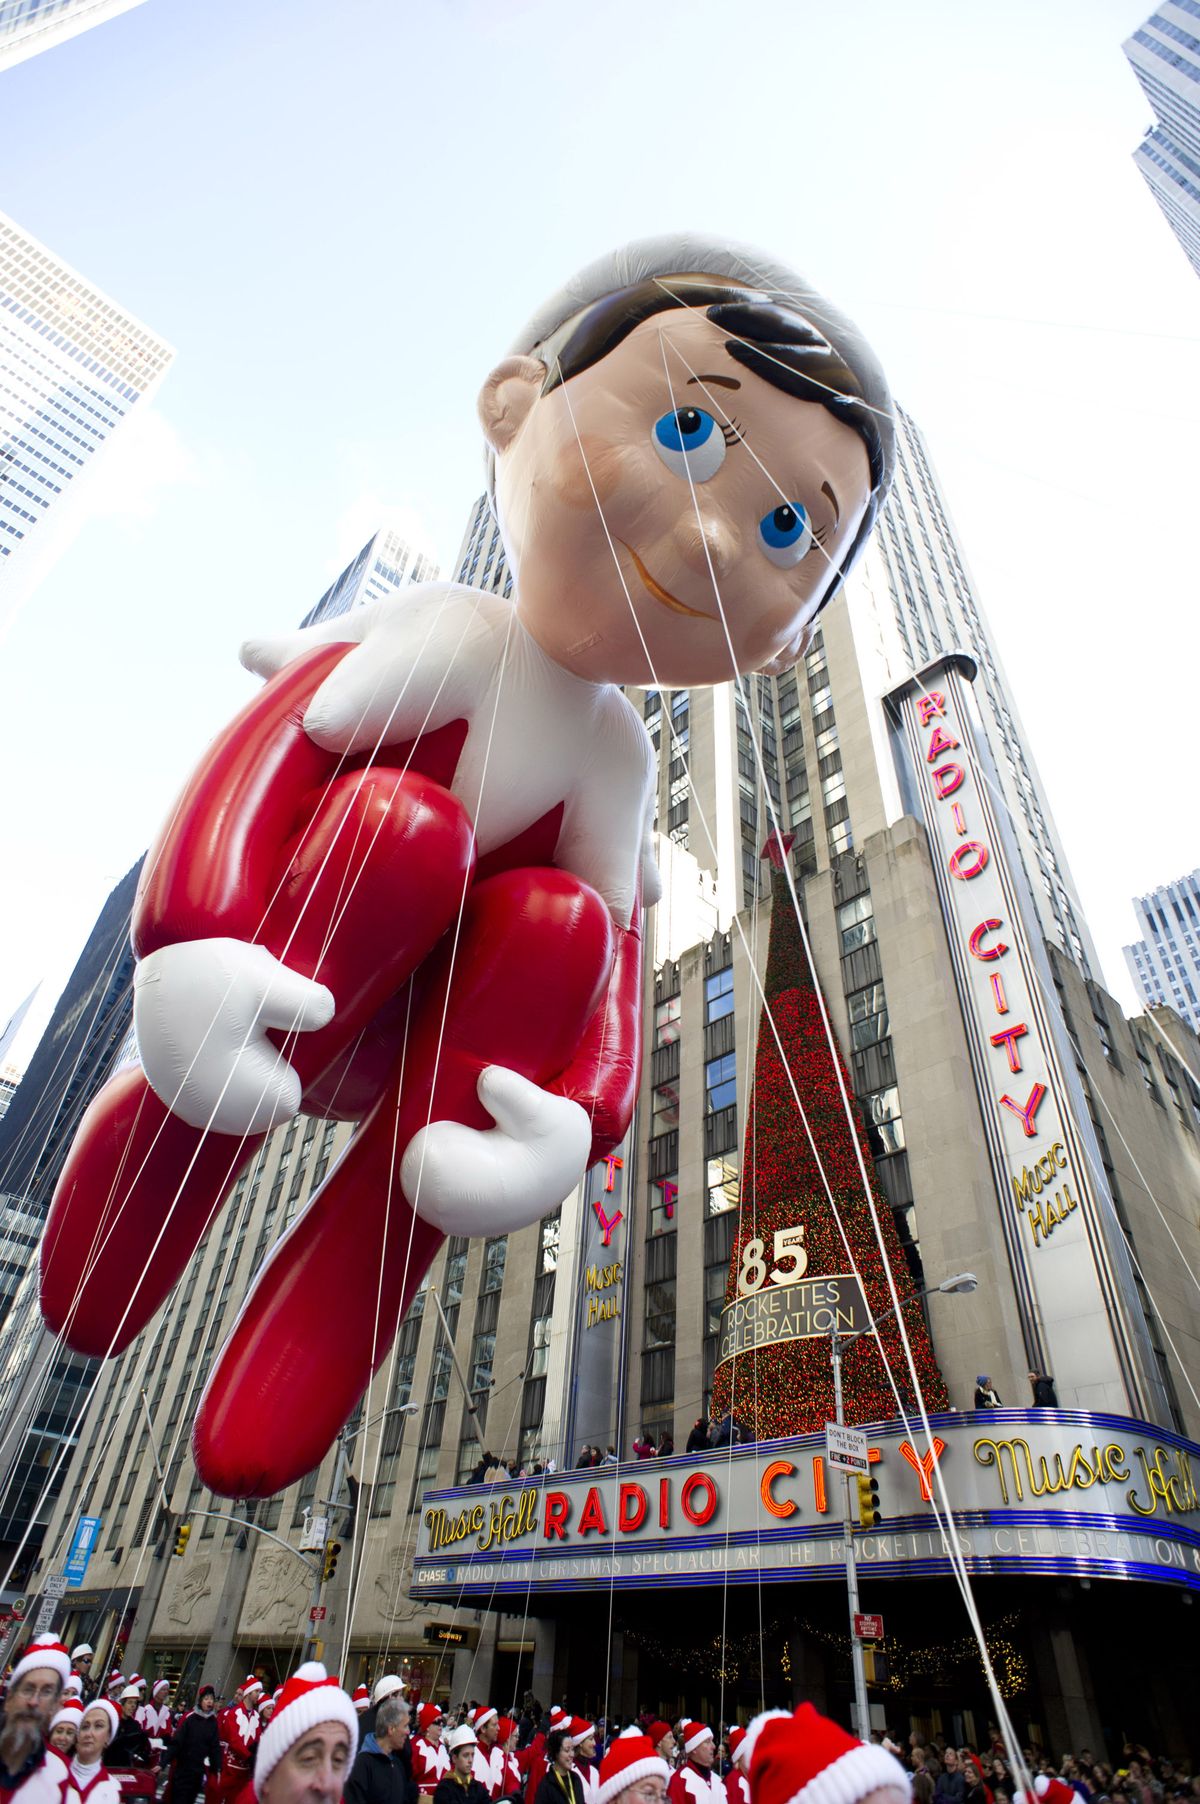 The Elf on the Shelf balloon floats in the Macy